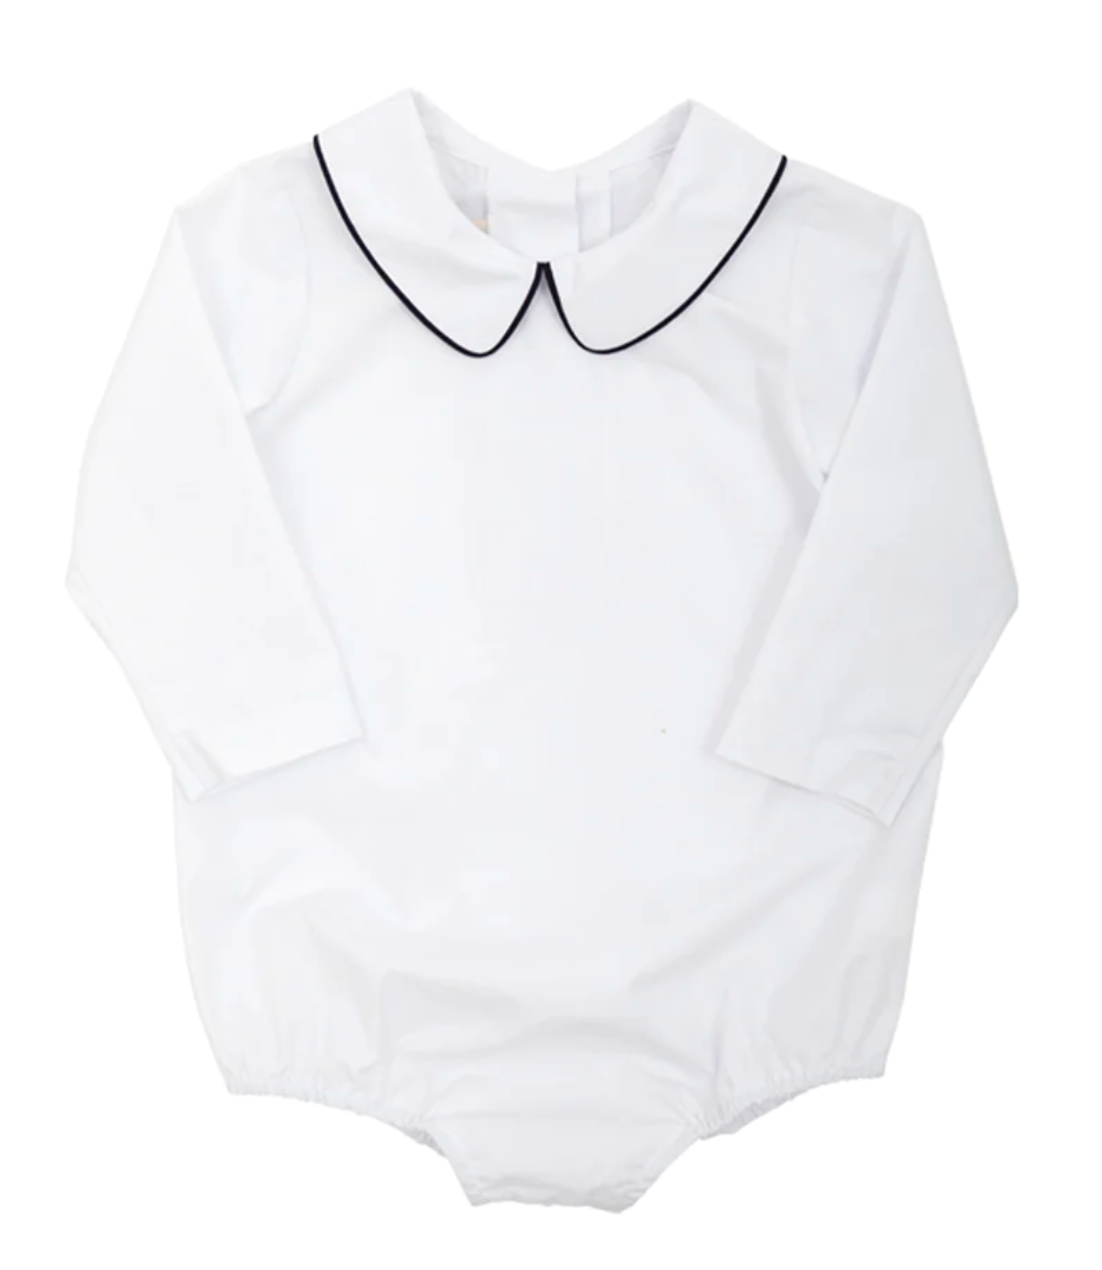 Peter Pan Collar Onesie (Long Sleeve Woven) Worth Avenue White With Nantucket Navy